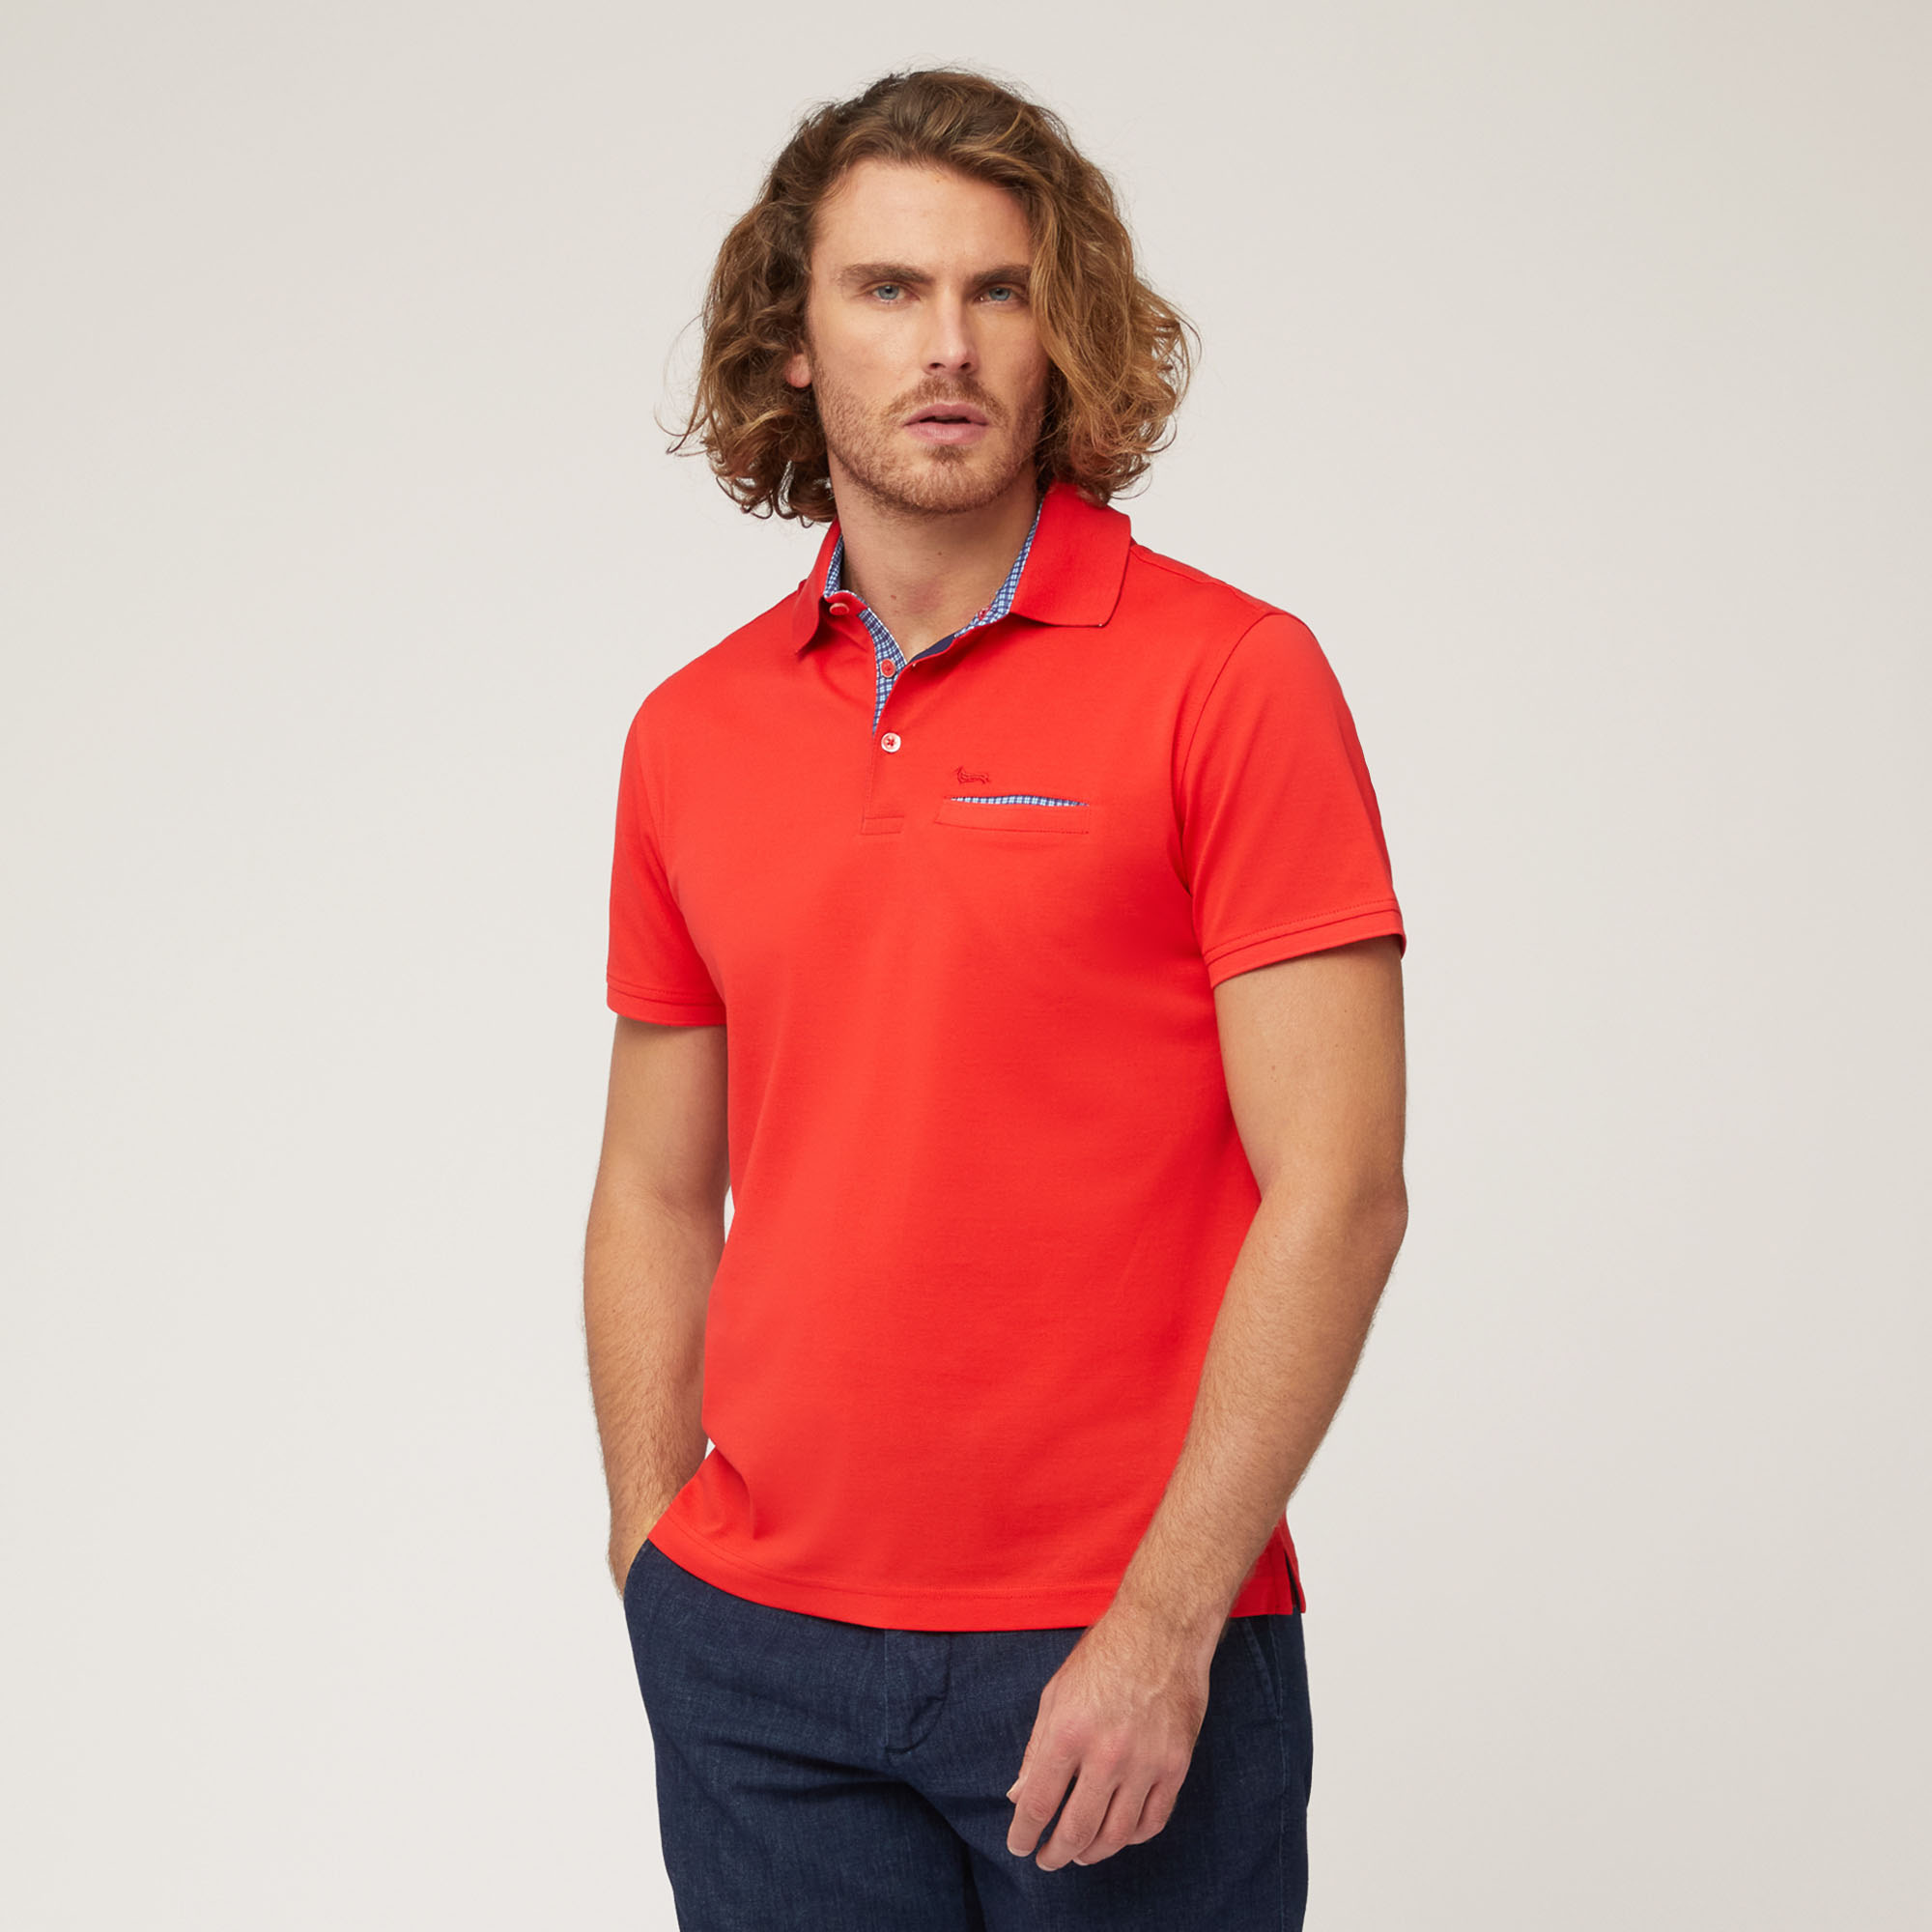 Polo with Printed Details, Light Red, large